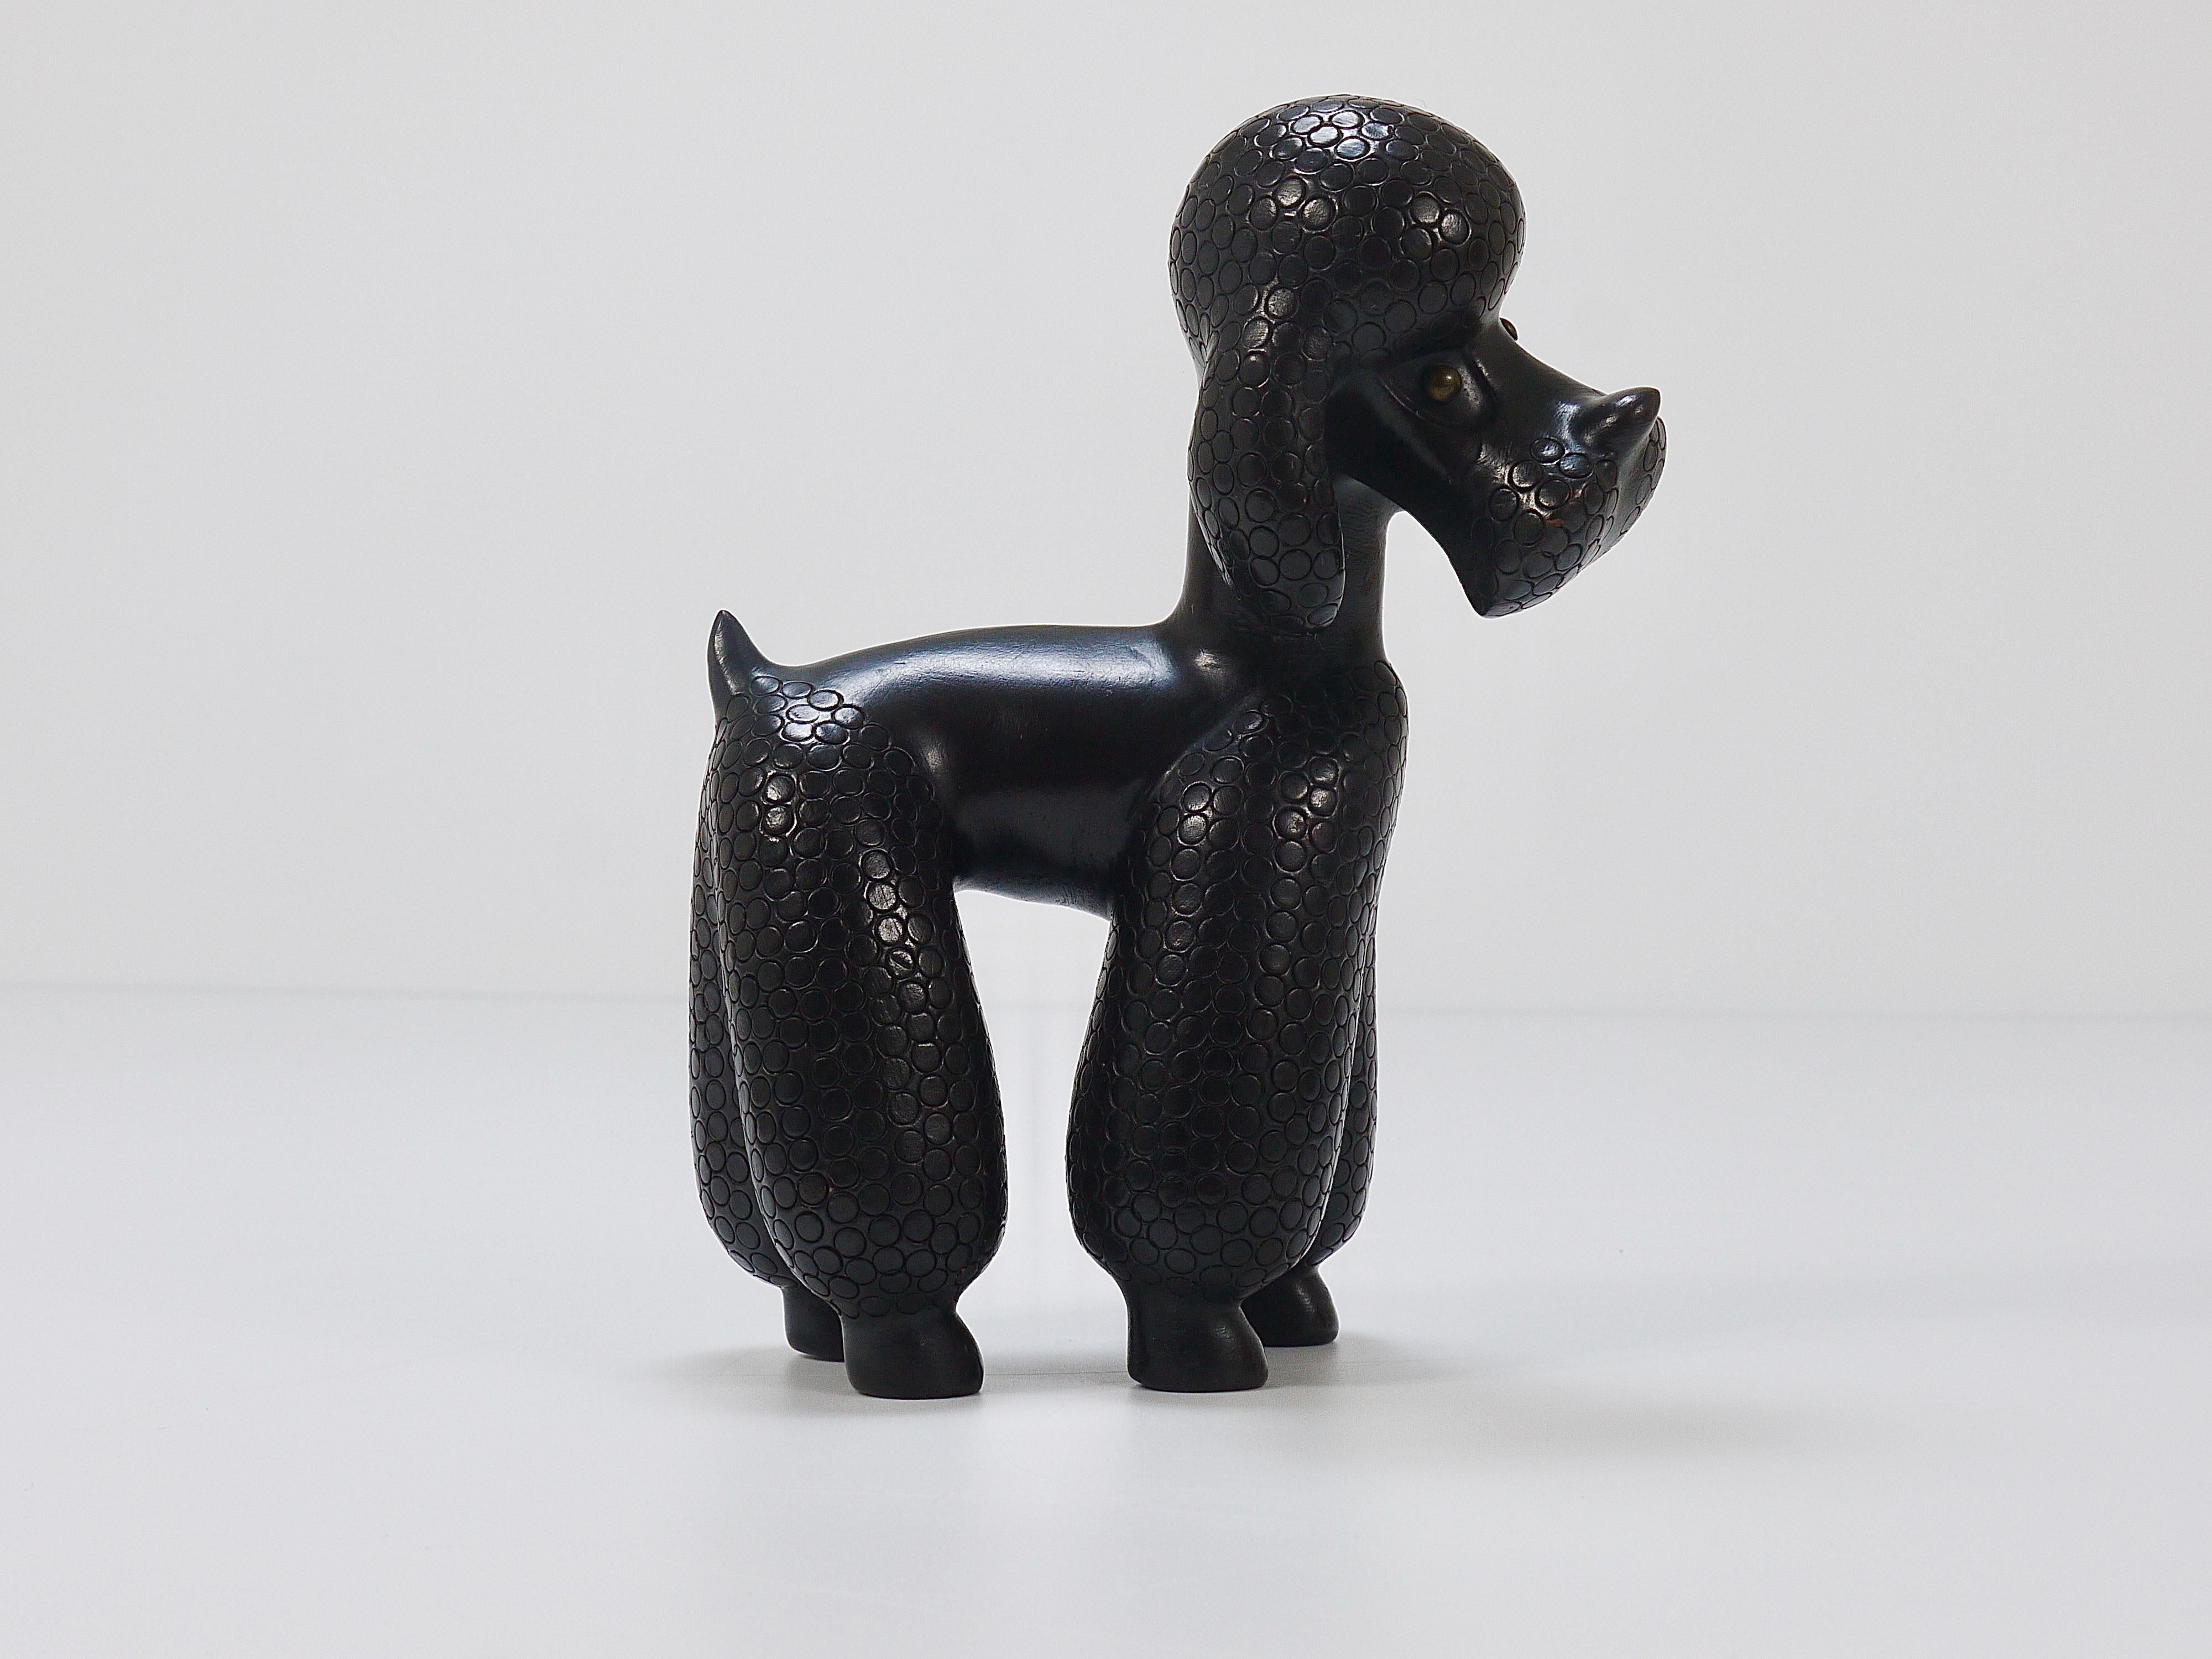 Mid-Century Modern Charming Dog Poodle Sculpture Figurine by Leopold Anzengruber, Austria, 1950s